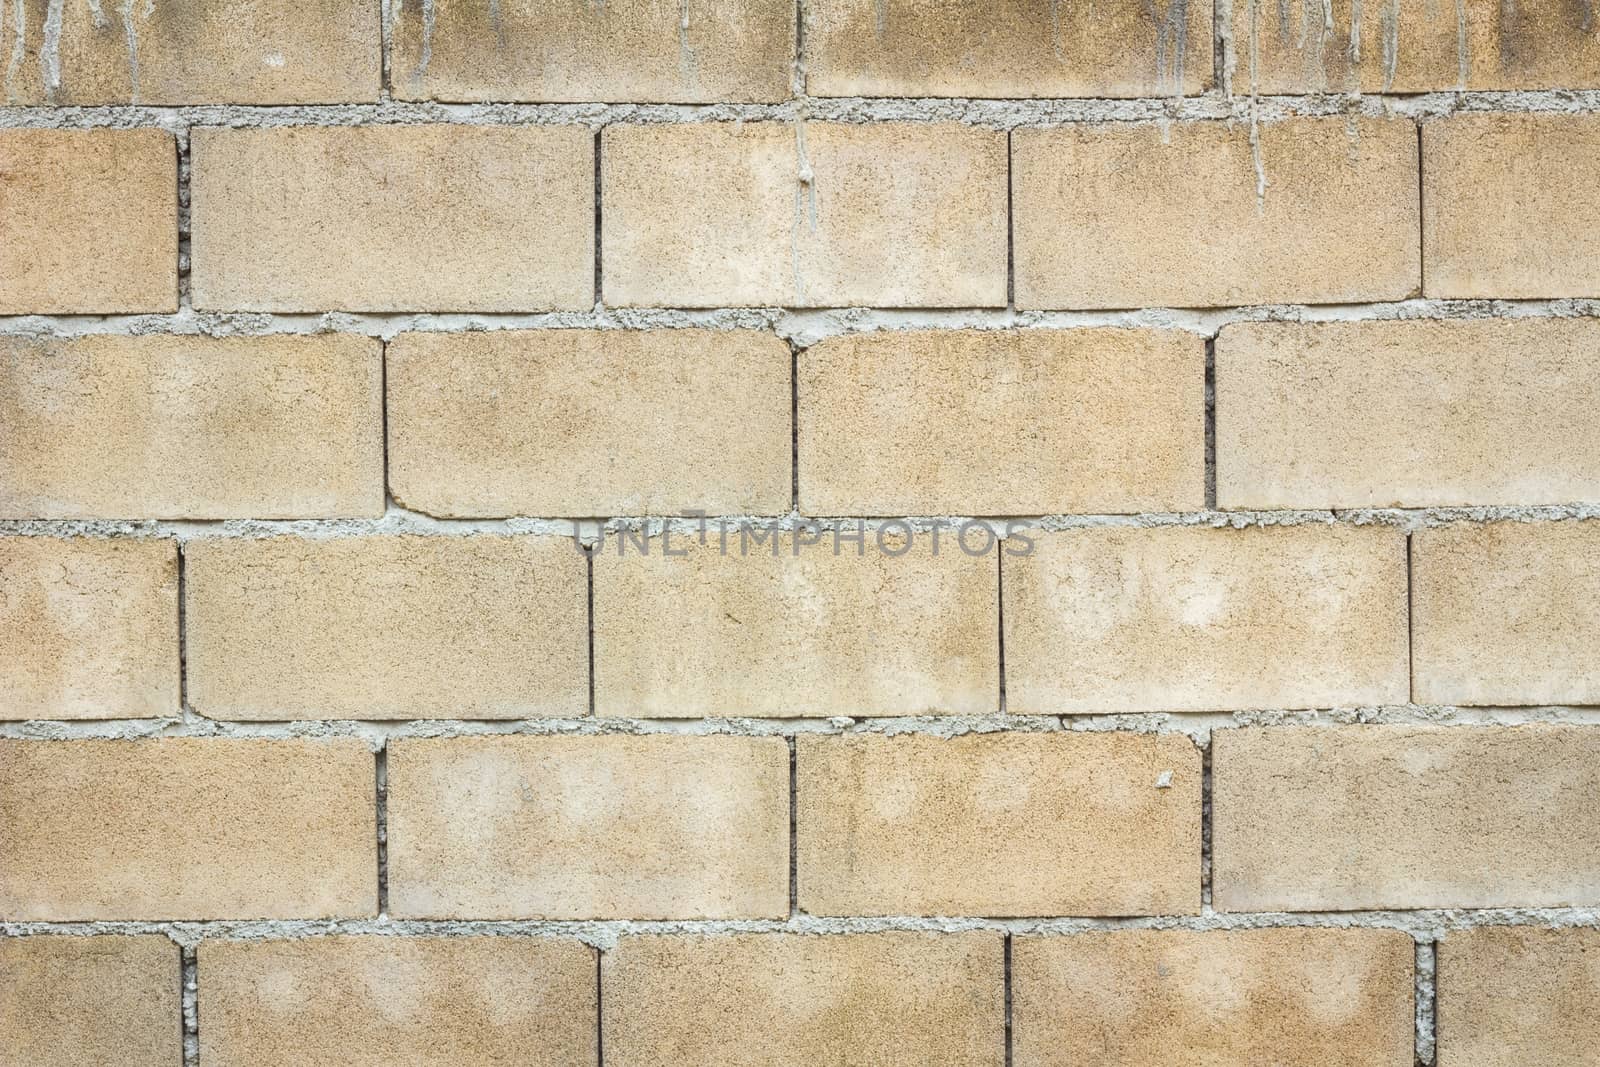 Hollow brick wall by a3701027